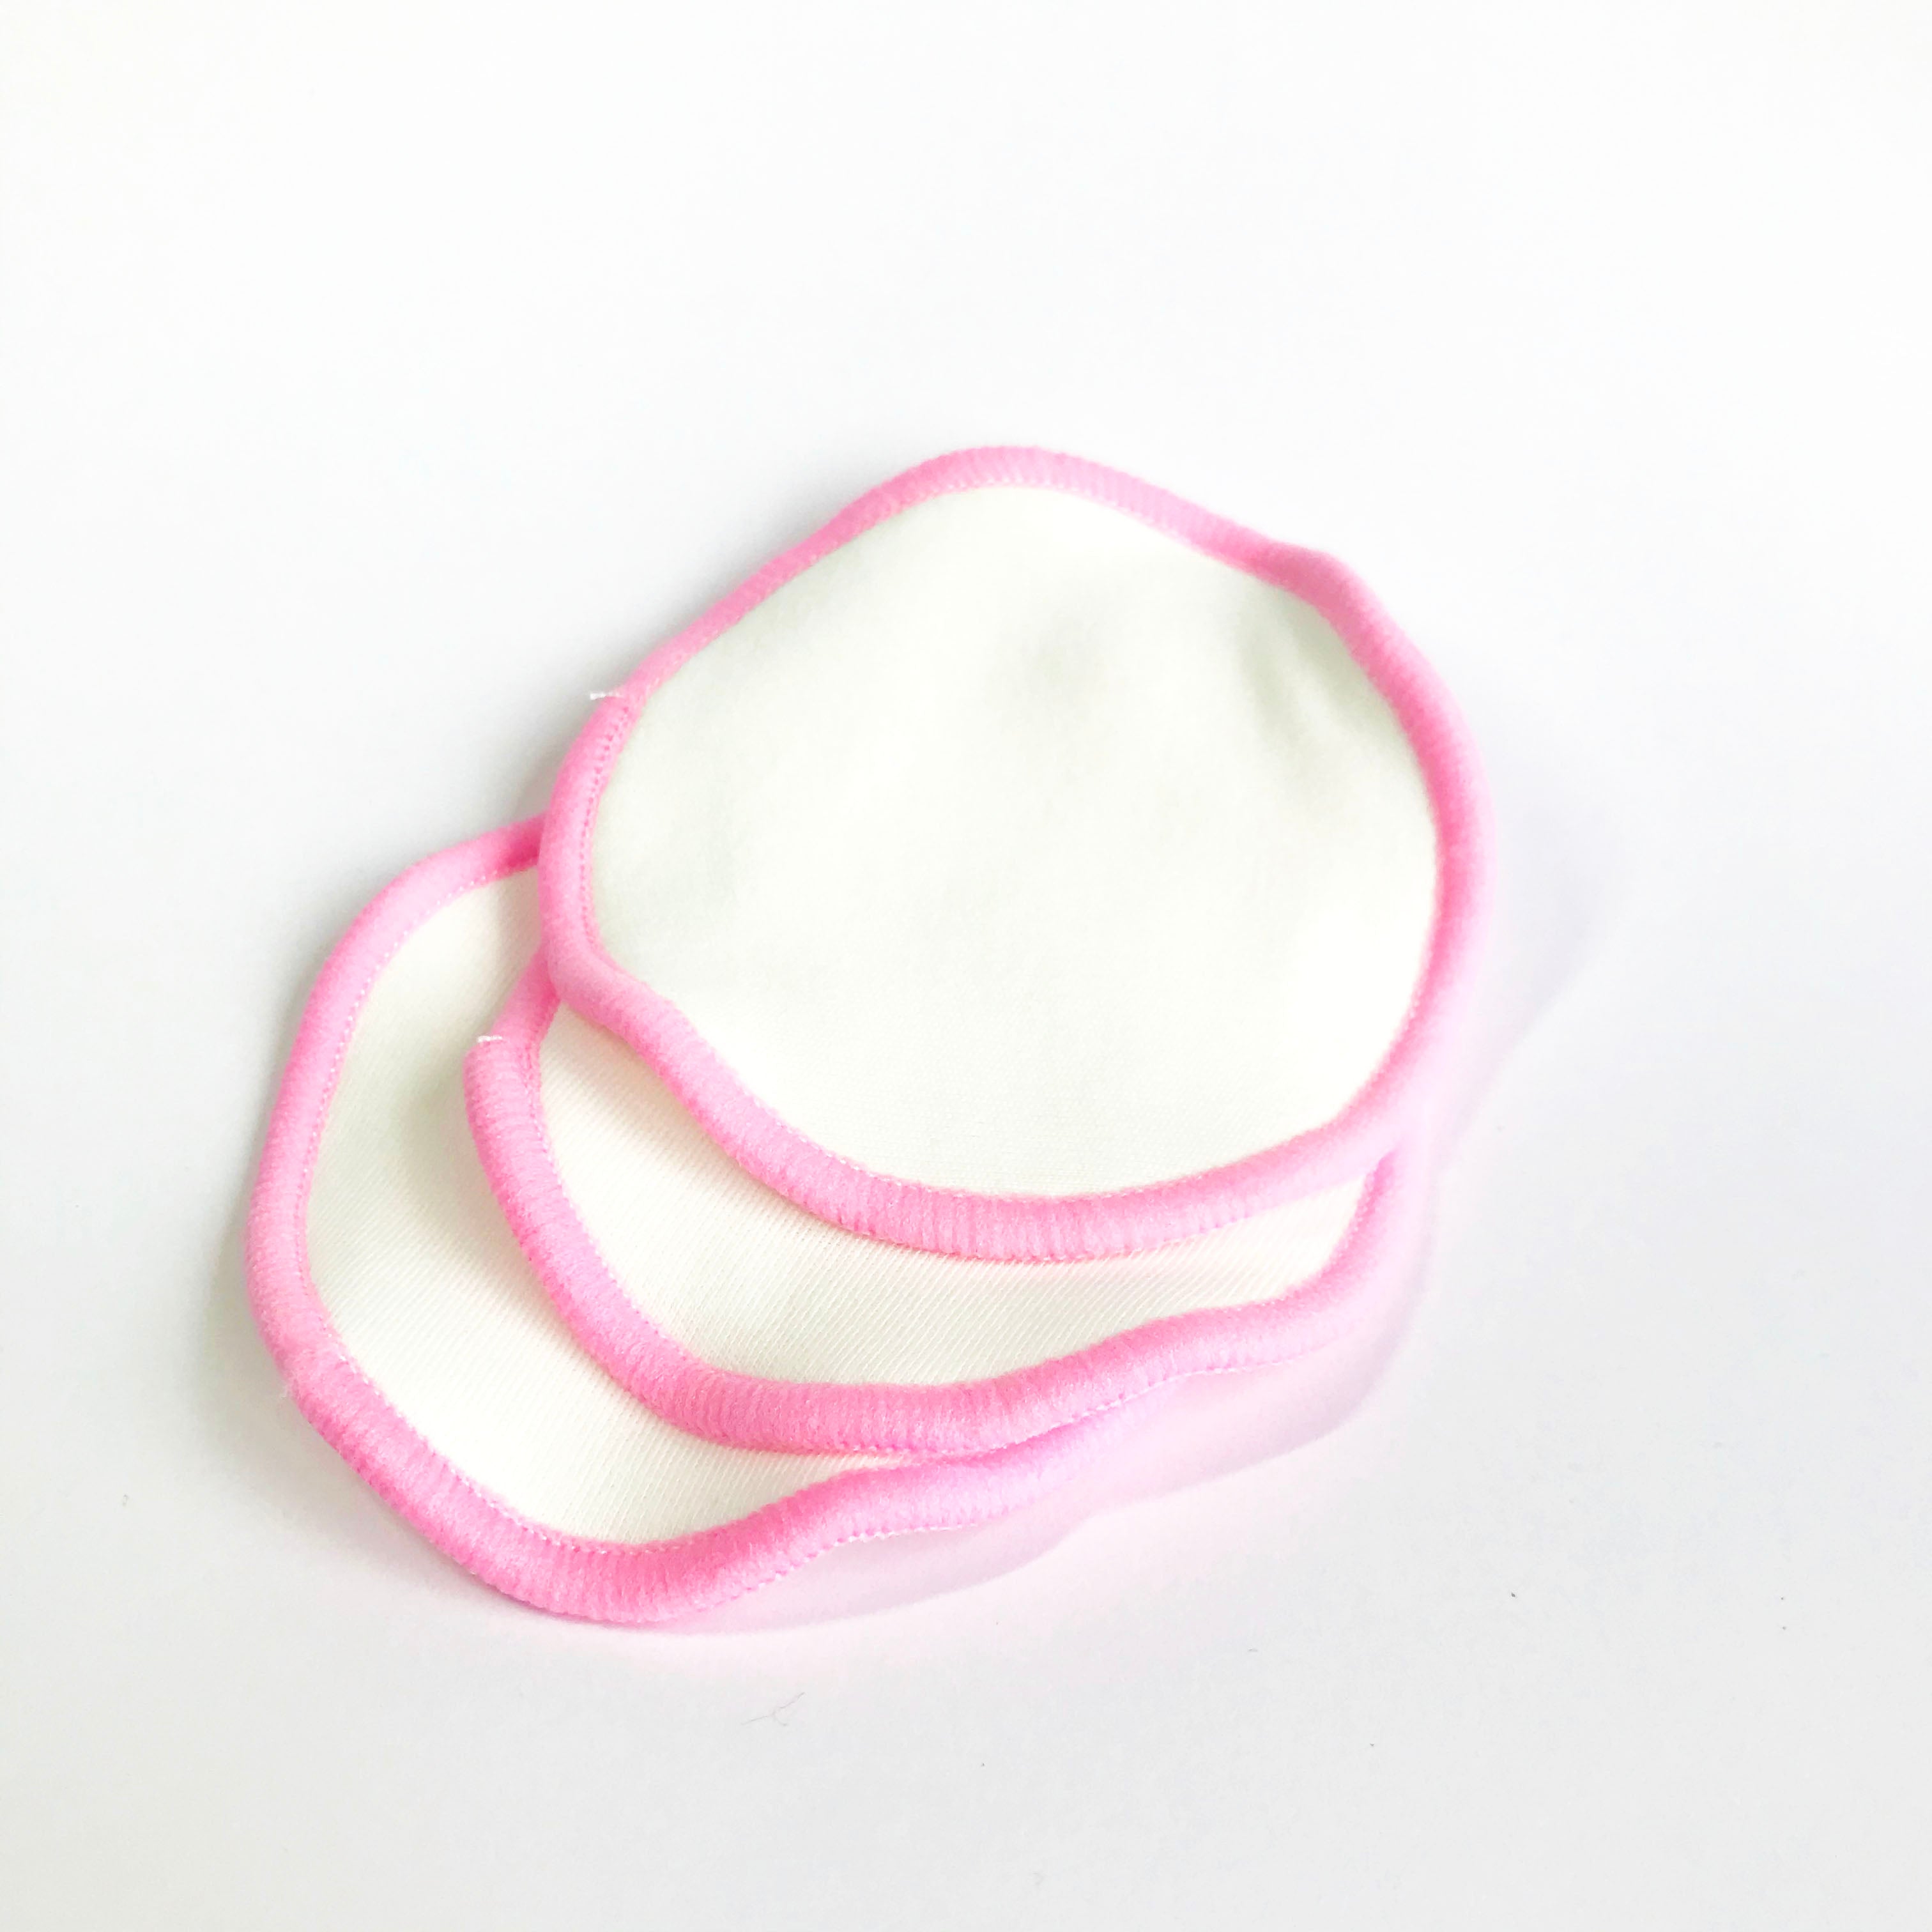 Reusable Organic Cotton Face Cleansing Pads (12s)